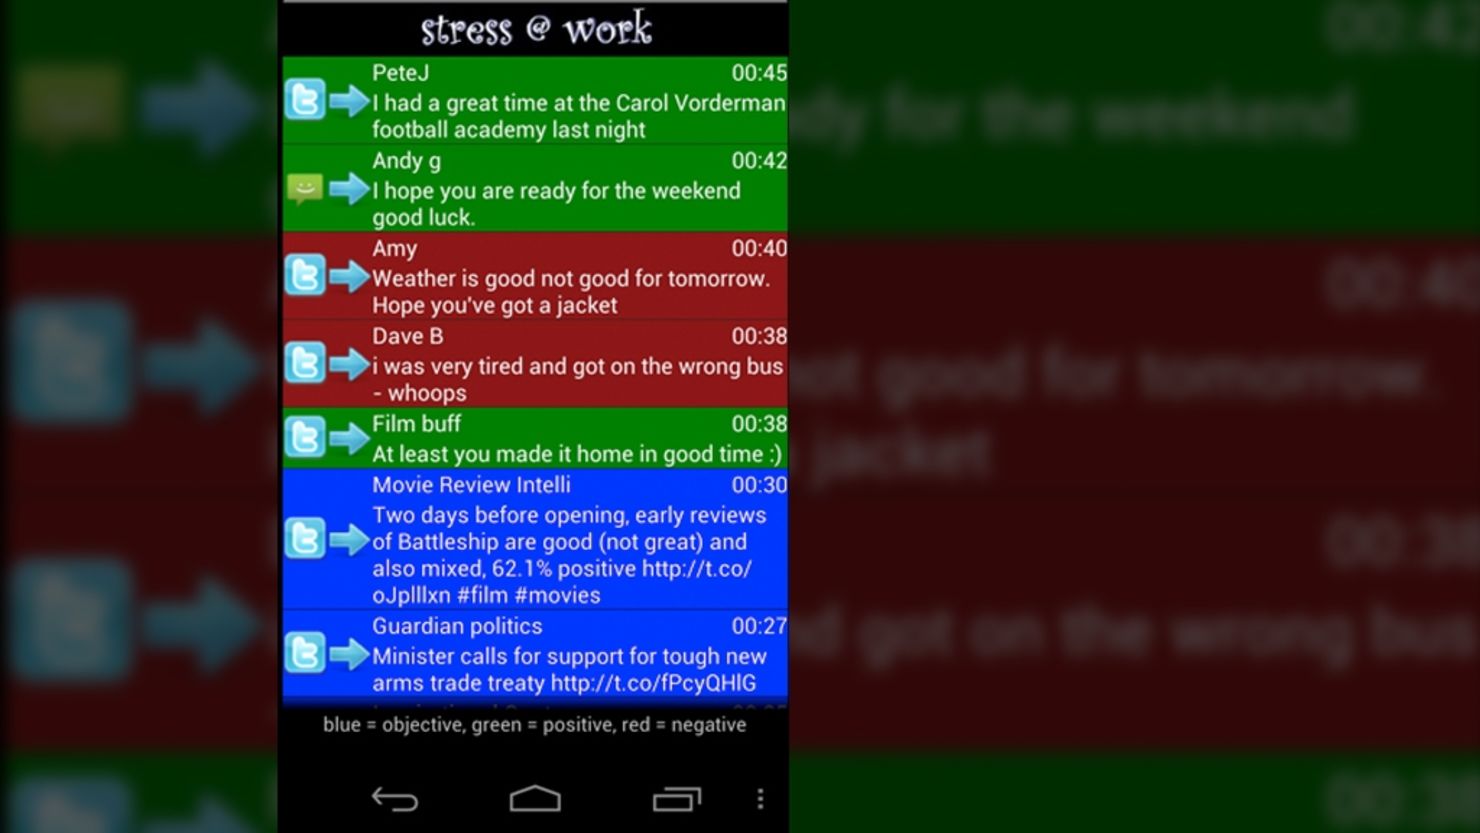 "Stress @ Work" color-codes incoming messages on Facebook, Twitter and via text to predict their mood.